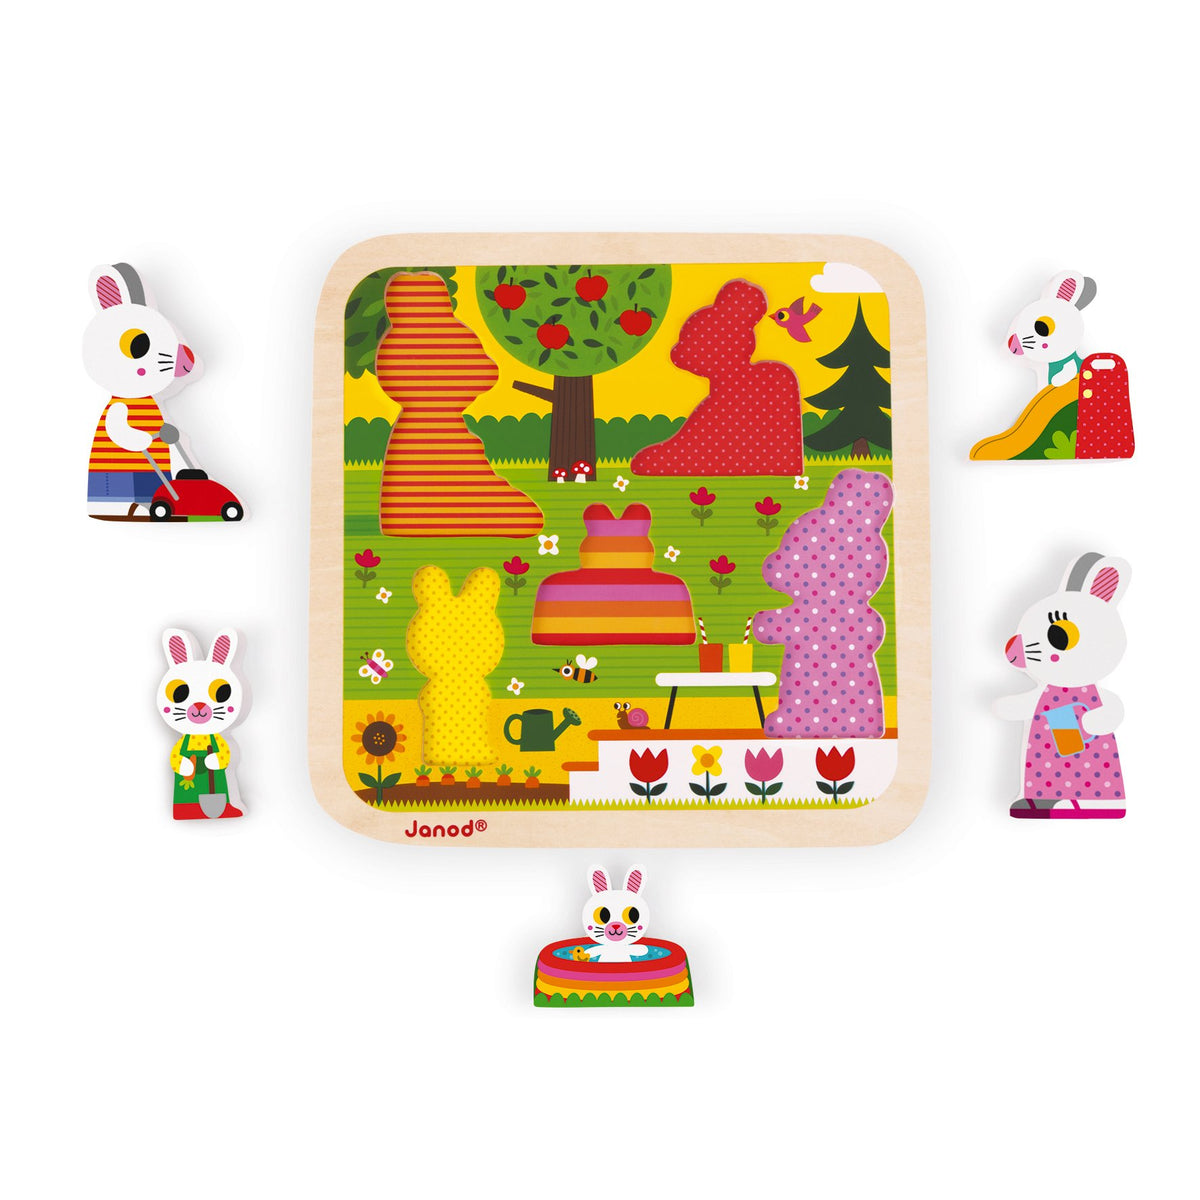 janod-garden-chunky-puzzle- (1)